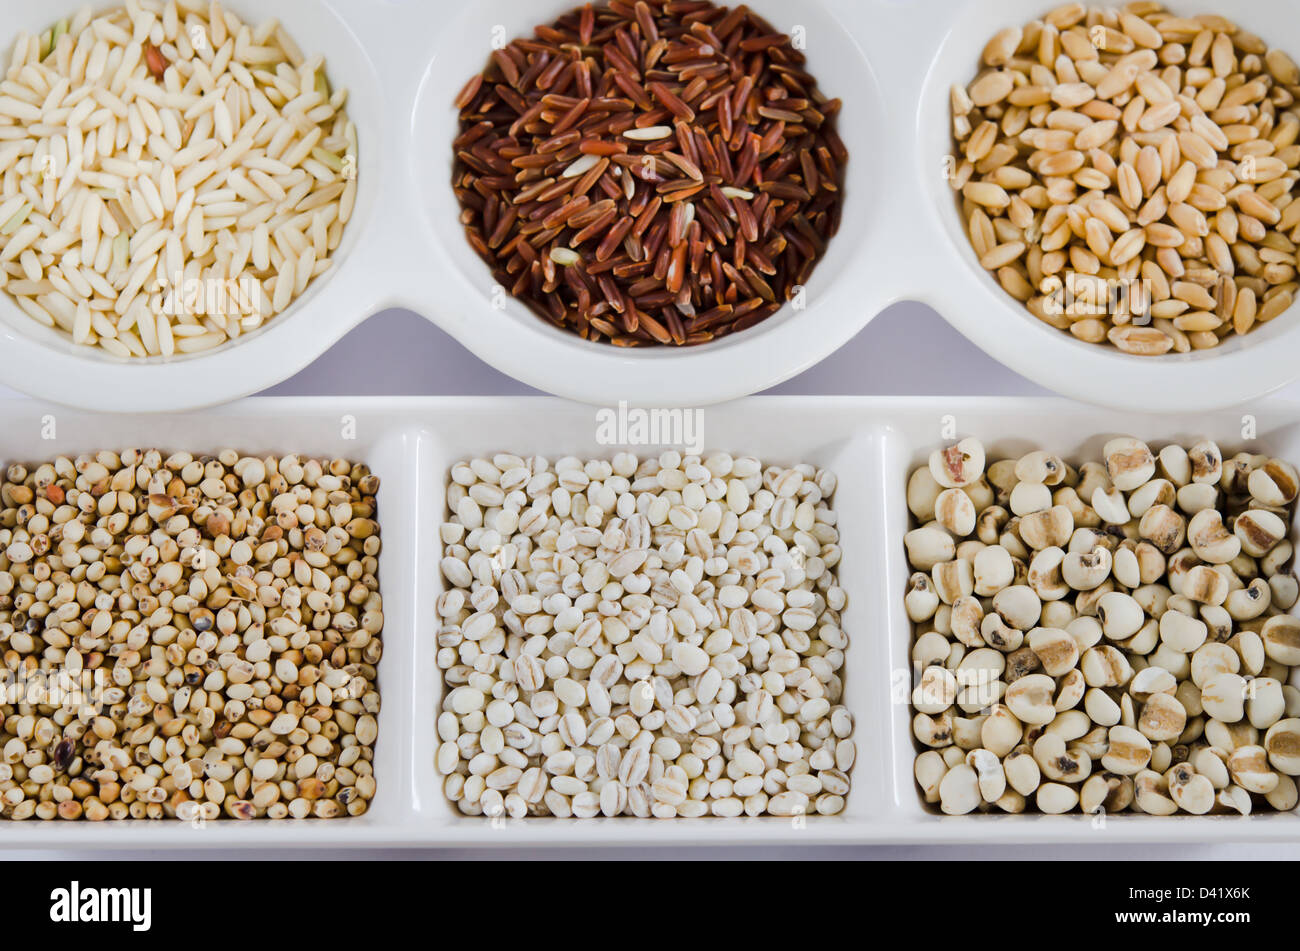 rice , red rice , wheat, job's tears , barley and millet grains on white bowl Stock Photo